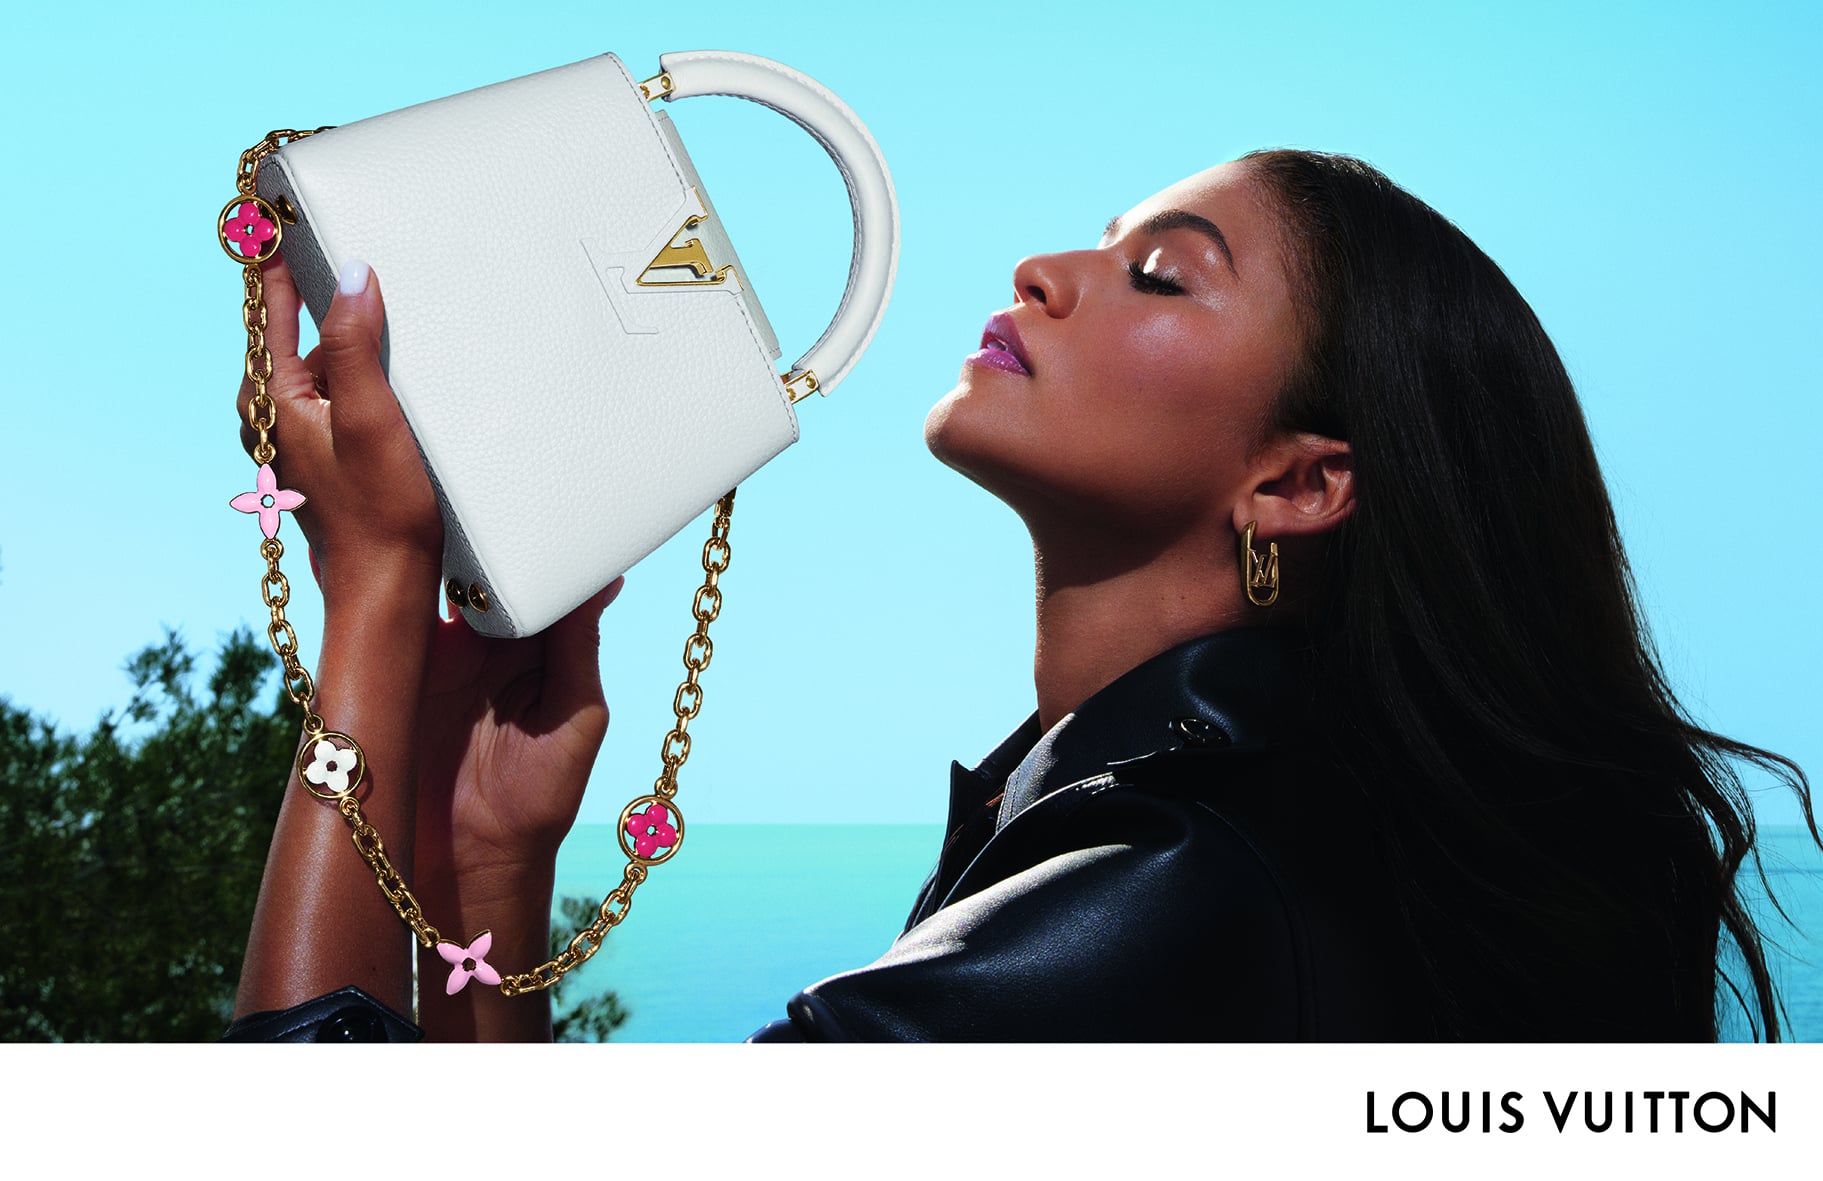 Louis Vuitton's 2022 Holiday Campaign is a Romantic Comedy